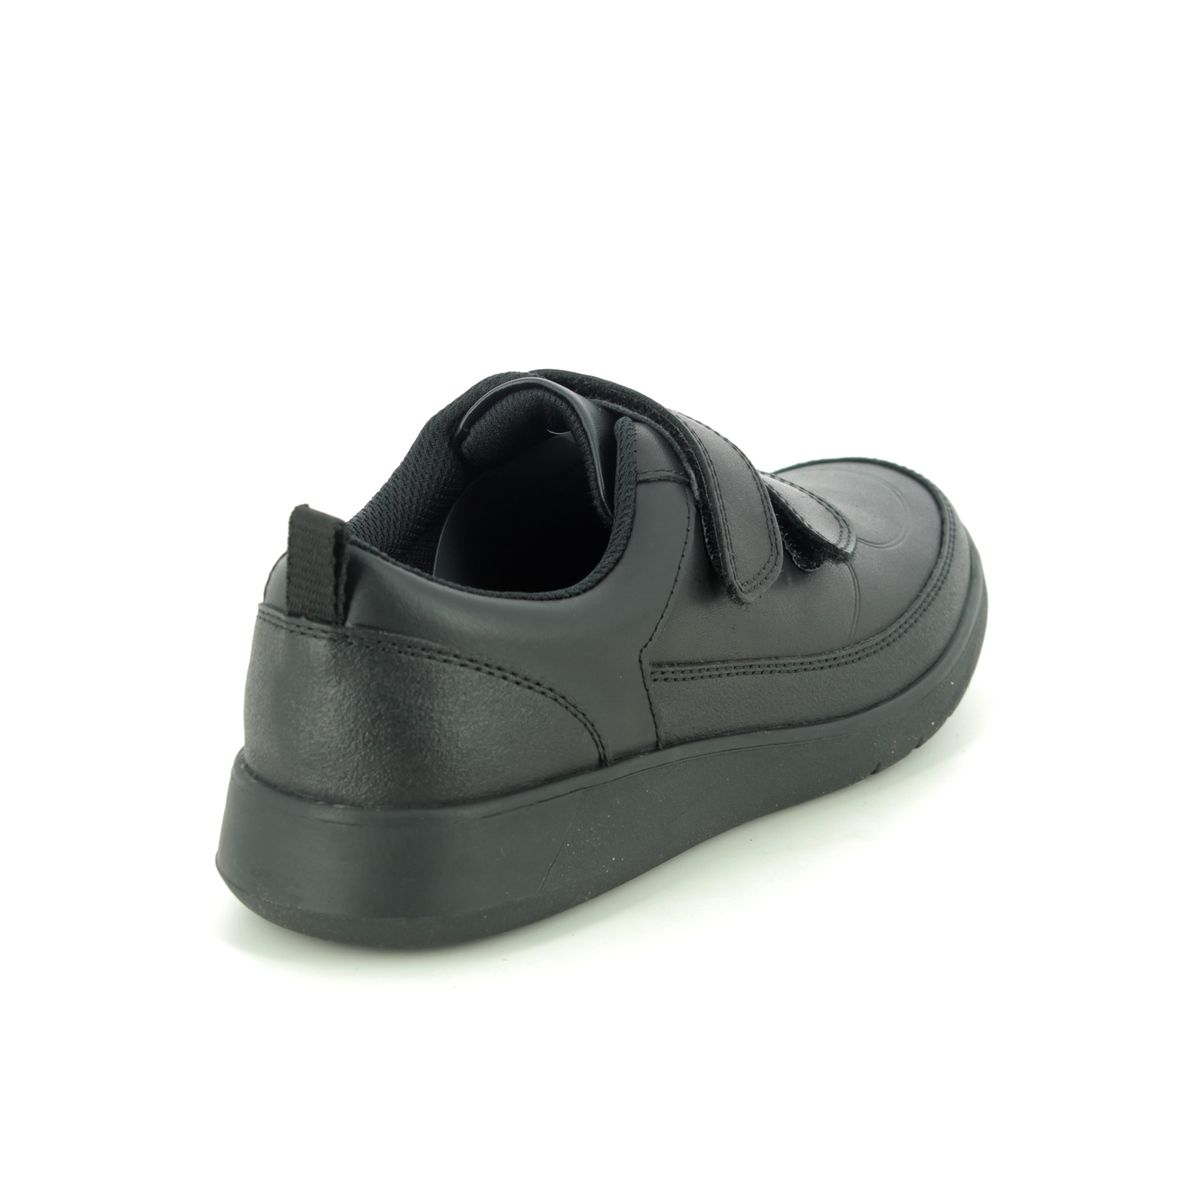 Clarks Scape Flare Toddler Leather Shoes in Black Standard Fit Size 9 